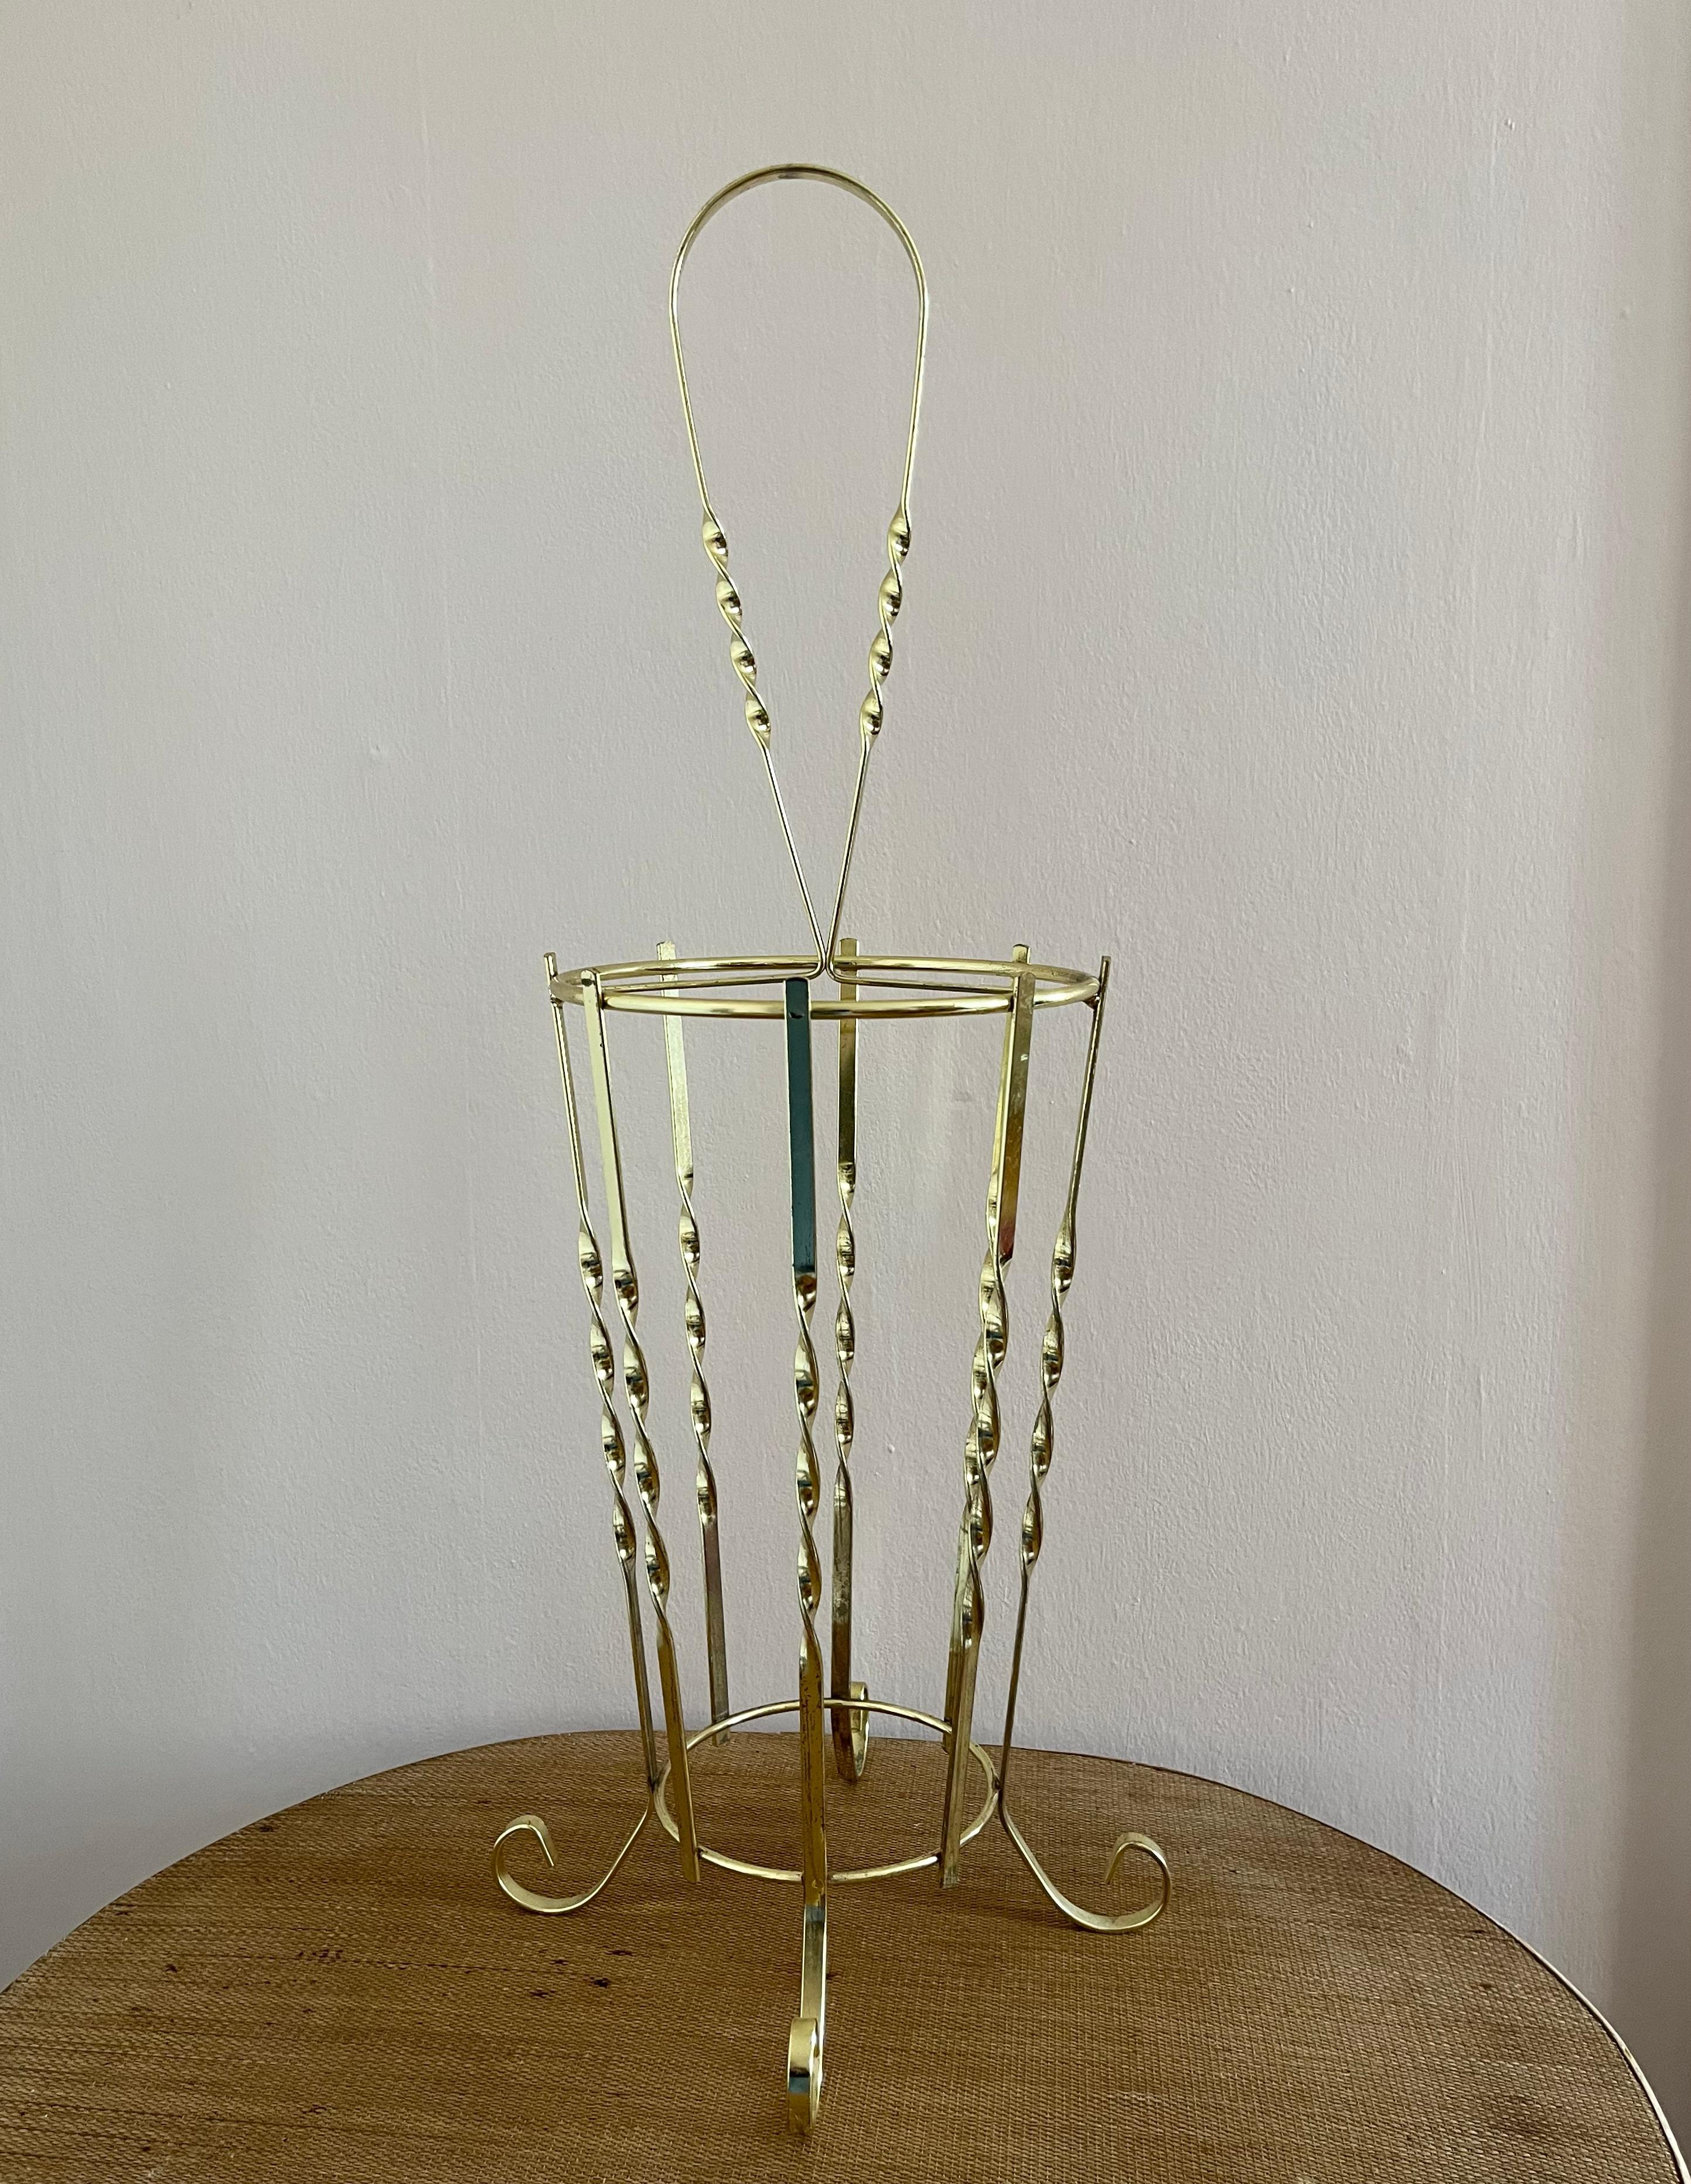 1970s golden umbrella stand with twisted details.

Perfect for the hall, this 1970s umbrella stand in golden metal has amazing twisted details. 

58 cm high and in very good vintage condition. 
